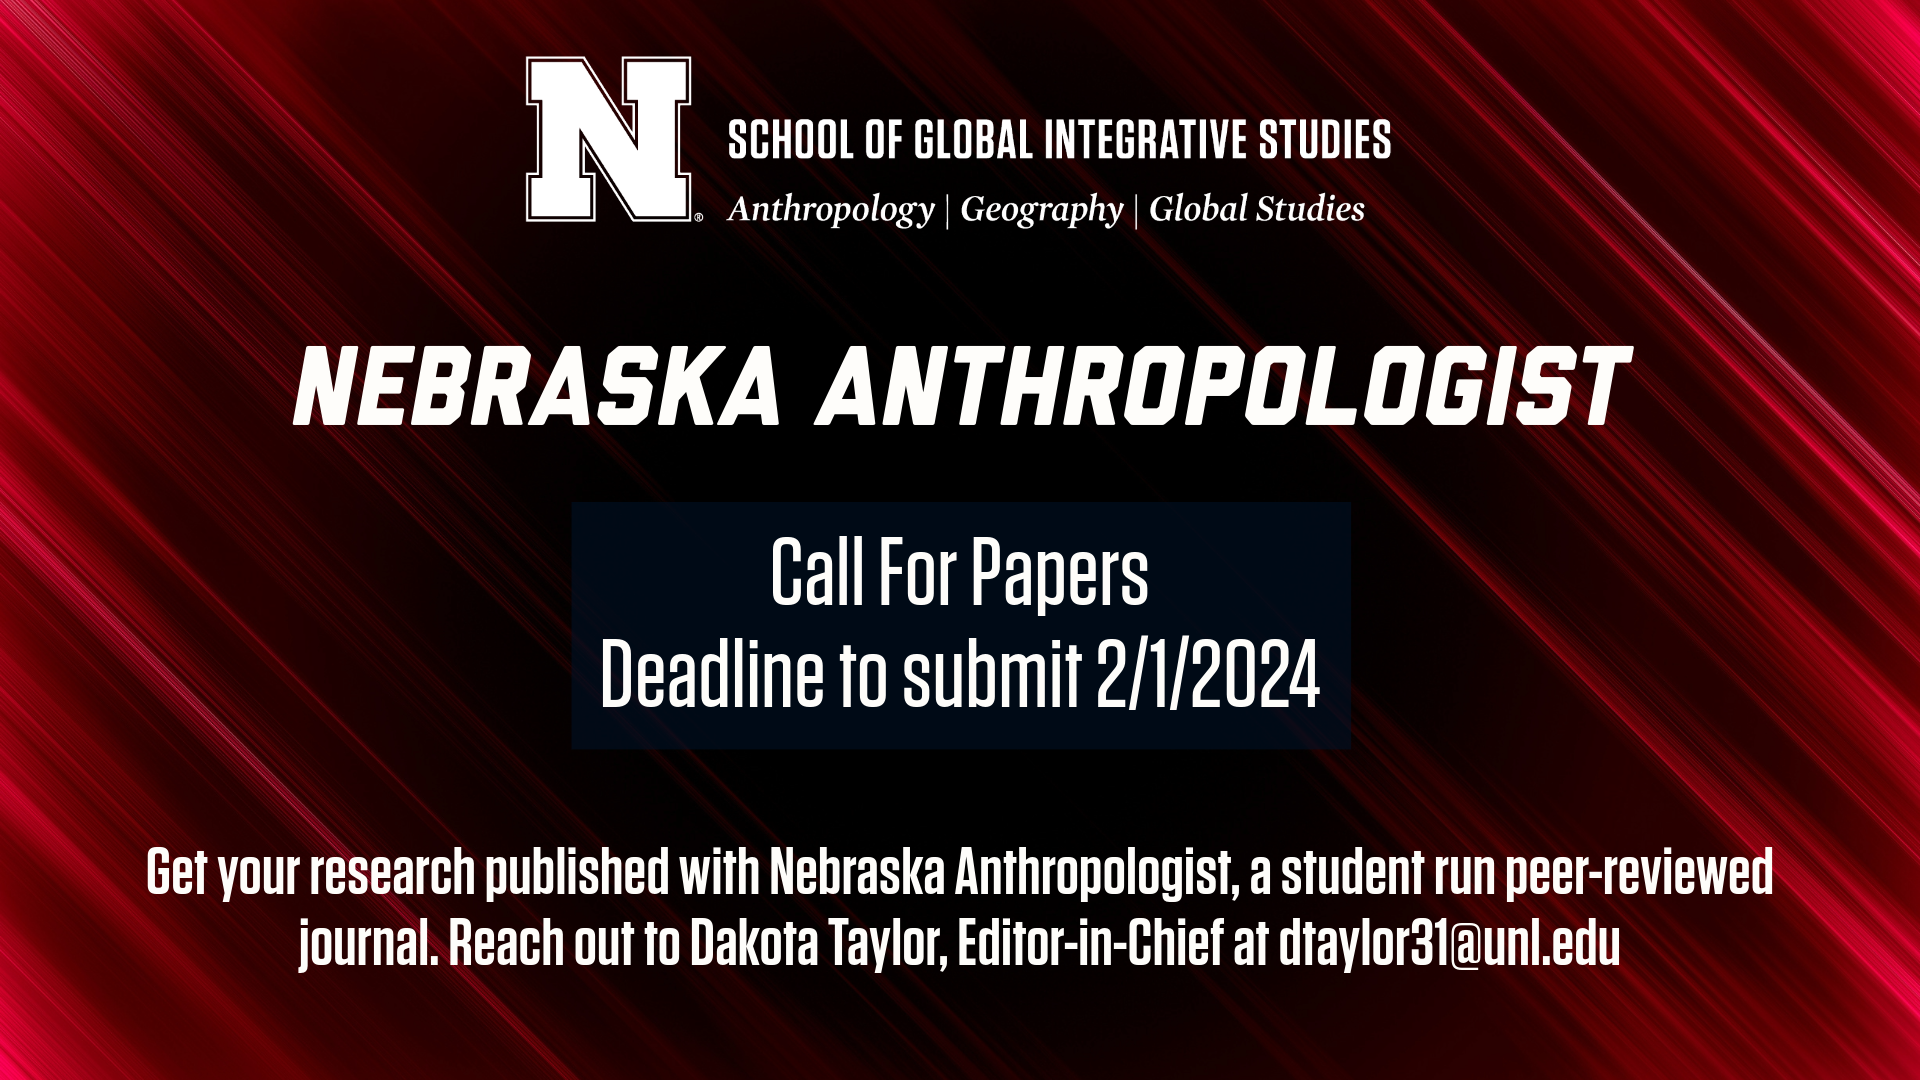 Publish your research with Nebraska Anthropologist